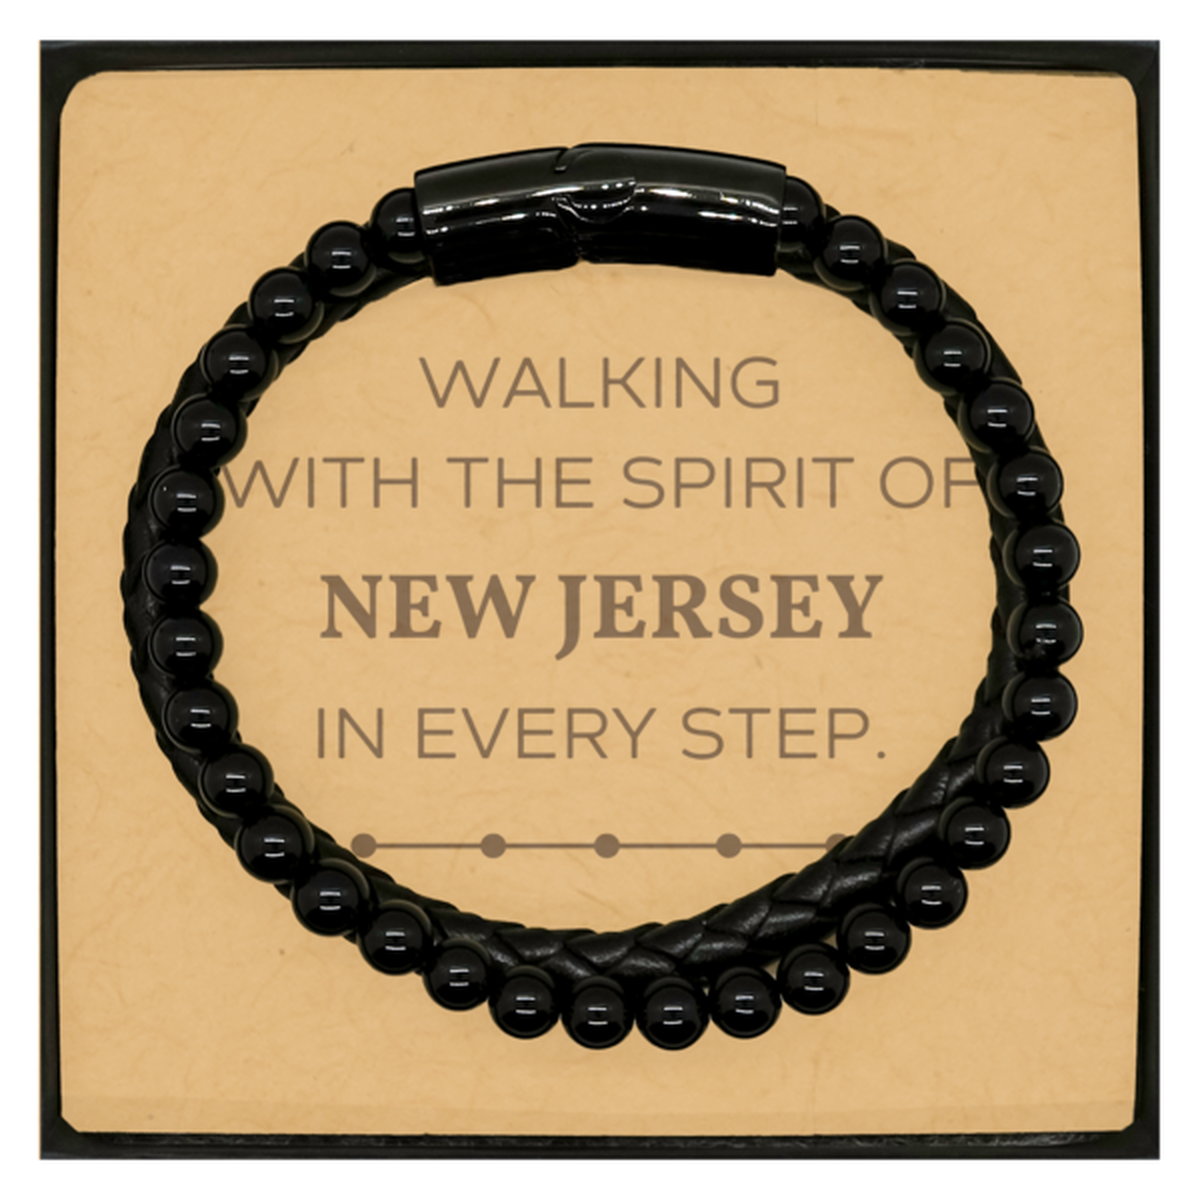 New Jersey Gifts, Walking with the spirit, Love New Jersey Birthday Christmas Stone Leather Bracelets For New Jersey People, Men, Women, Friends